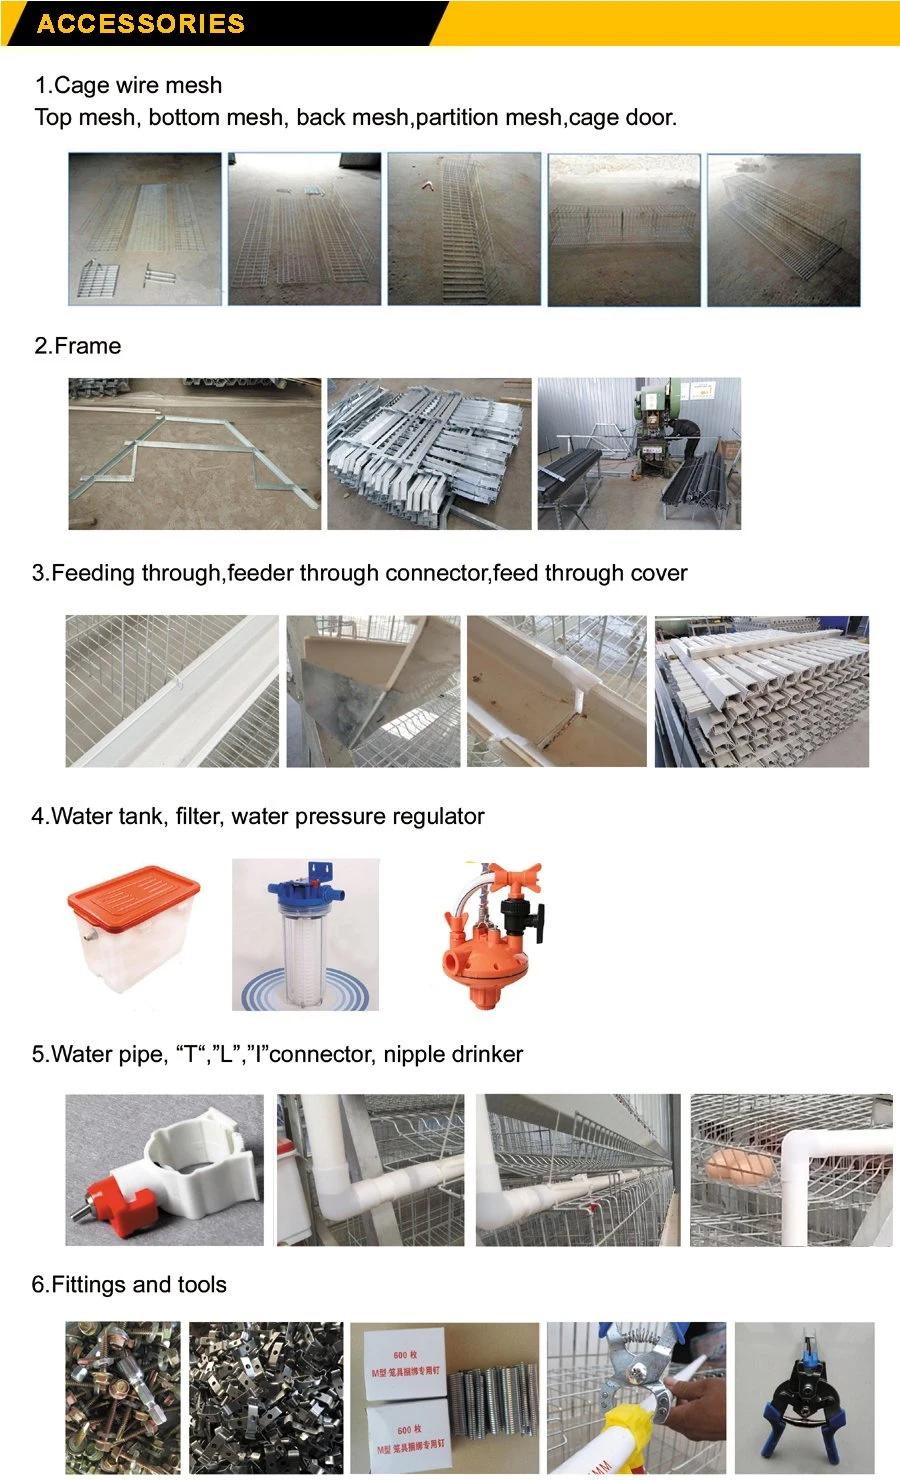 Hot DIP Galvanized Battery Layer Chicken Cage Poultry Equipment